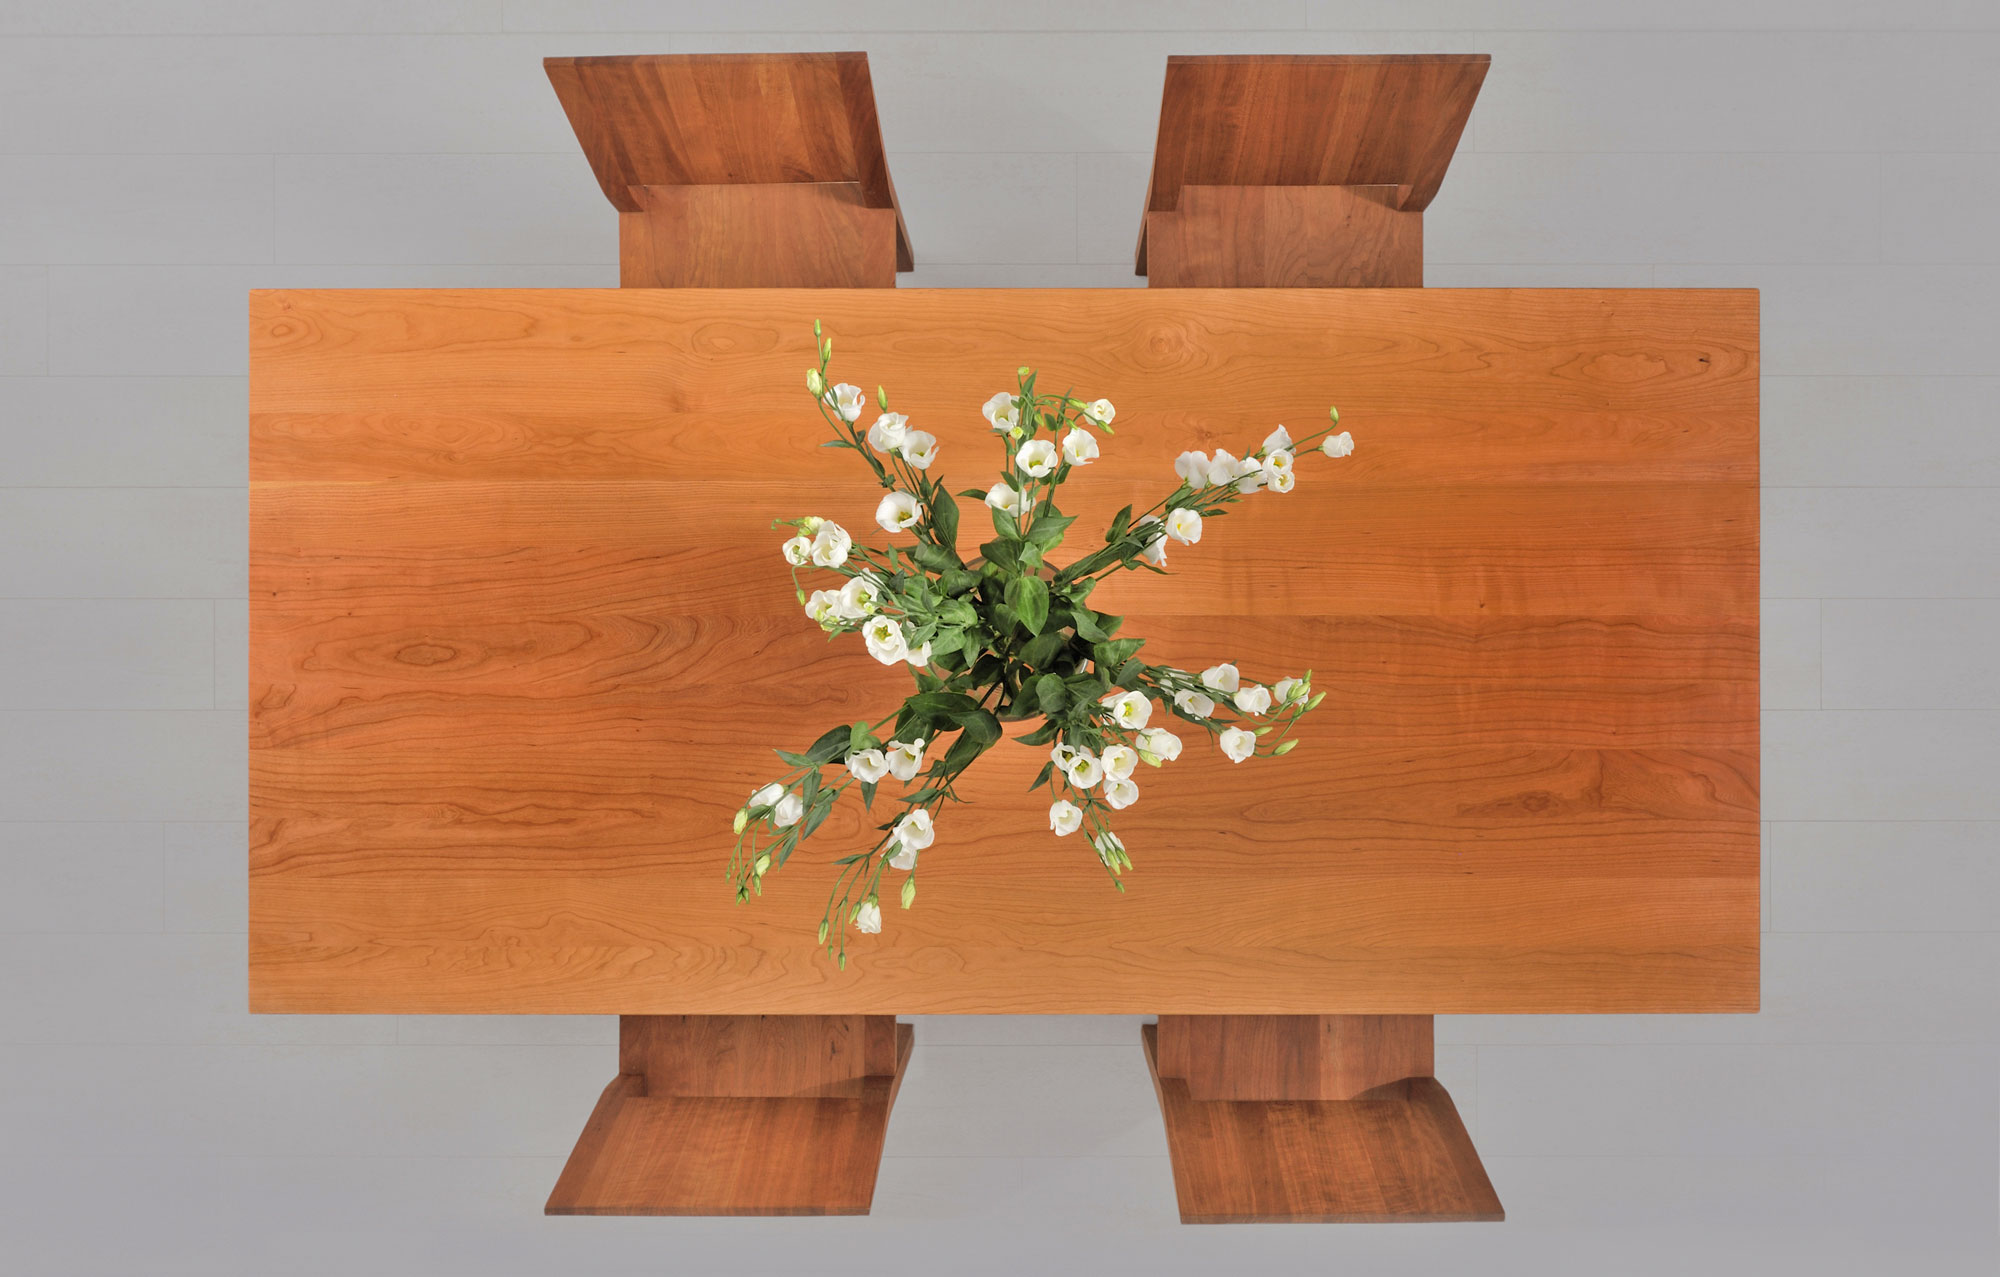 Tailor-Made Wood Table FORTE 3 B9X9 2239 custom made in solid wood by vitamin design